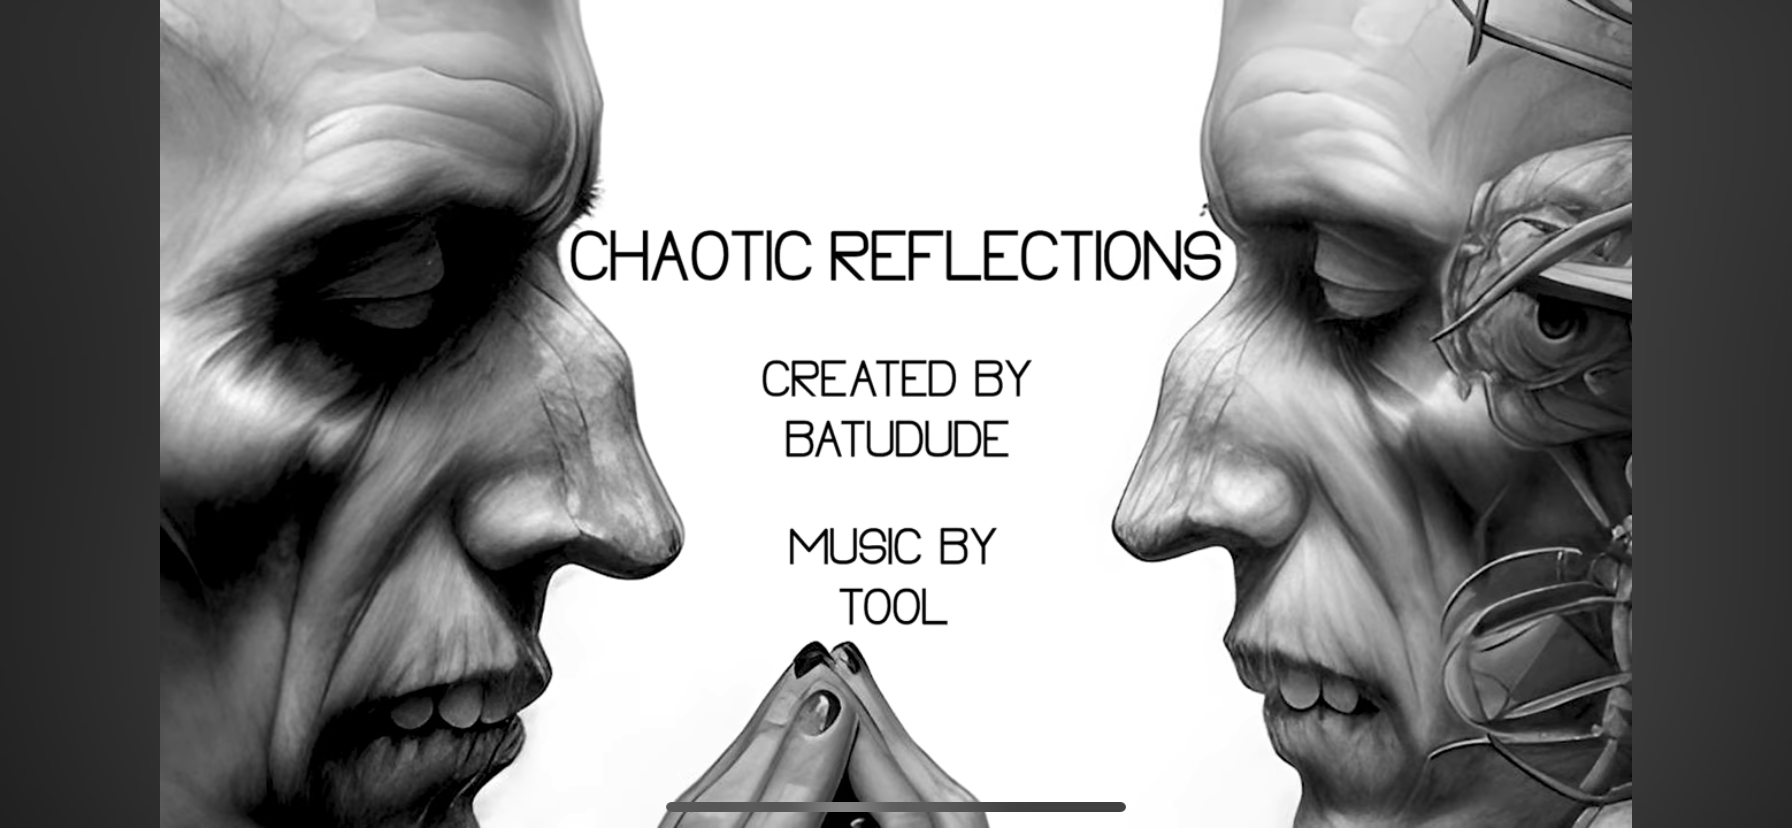 Chaotic Reflections